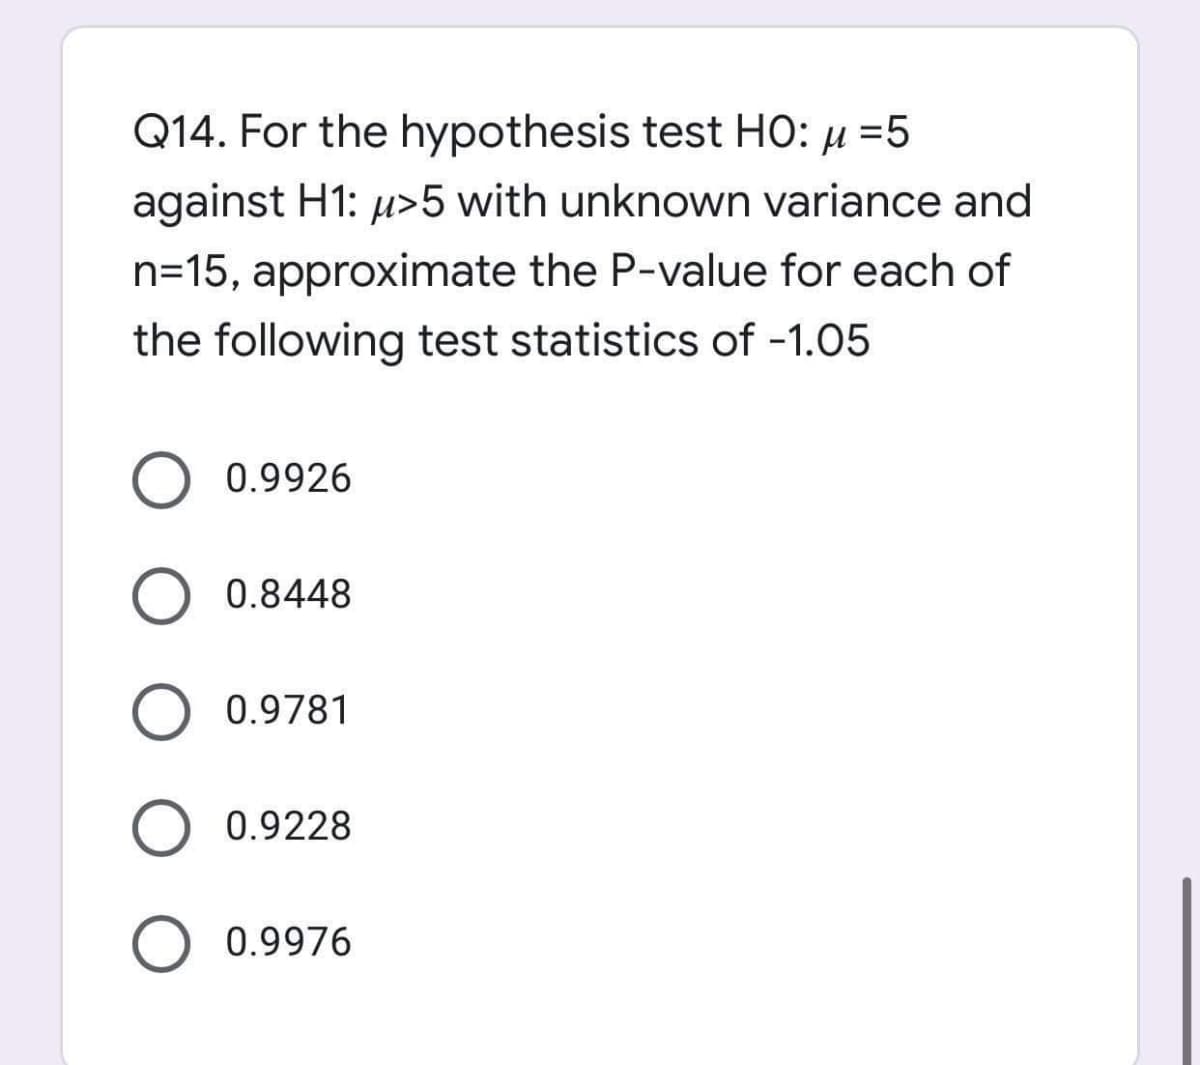 Q14. For the hypothesis test HO: µ =5
against H1: u>5 with unknown variance and
n=15, approximate the P-value for each of
the following test statistics of -1.05
0.9926
0.8448
O 0.9781
0.9228
0.9976
